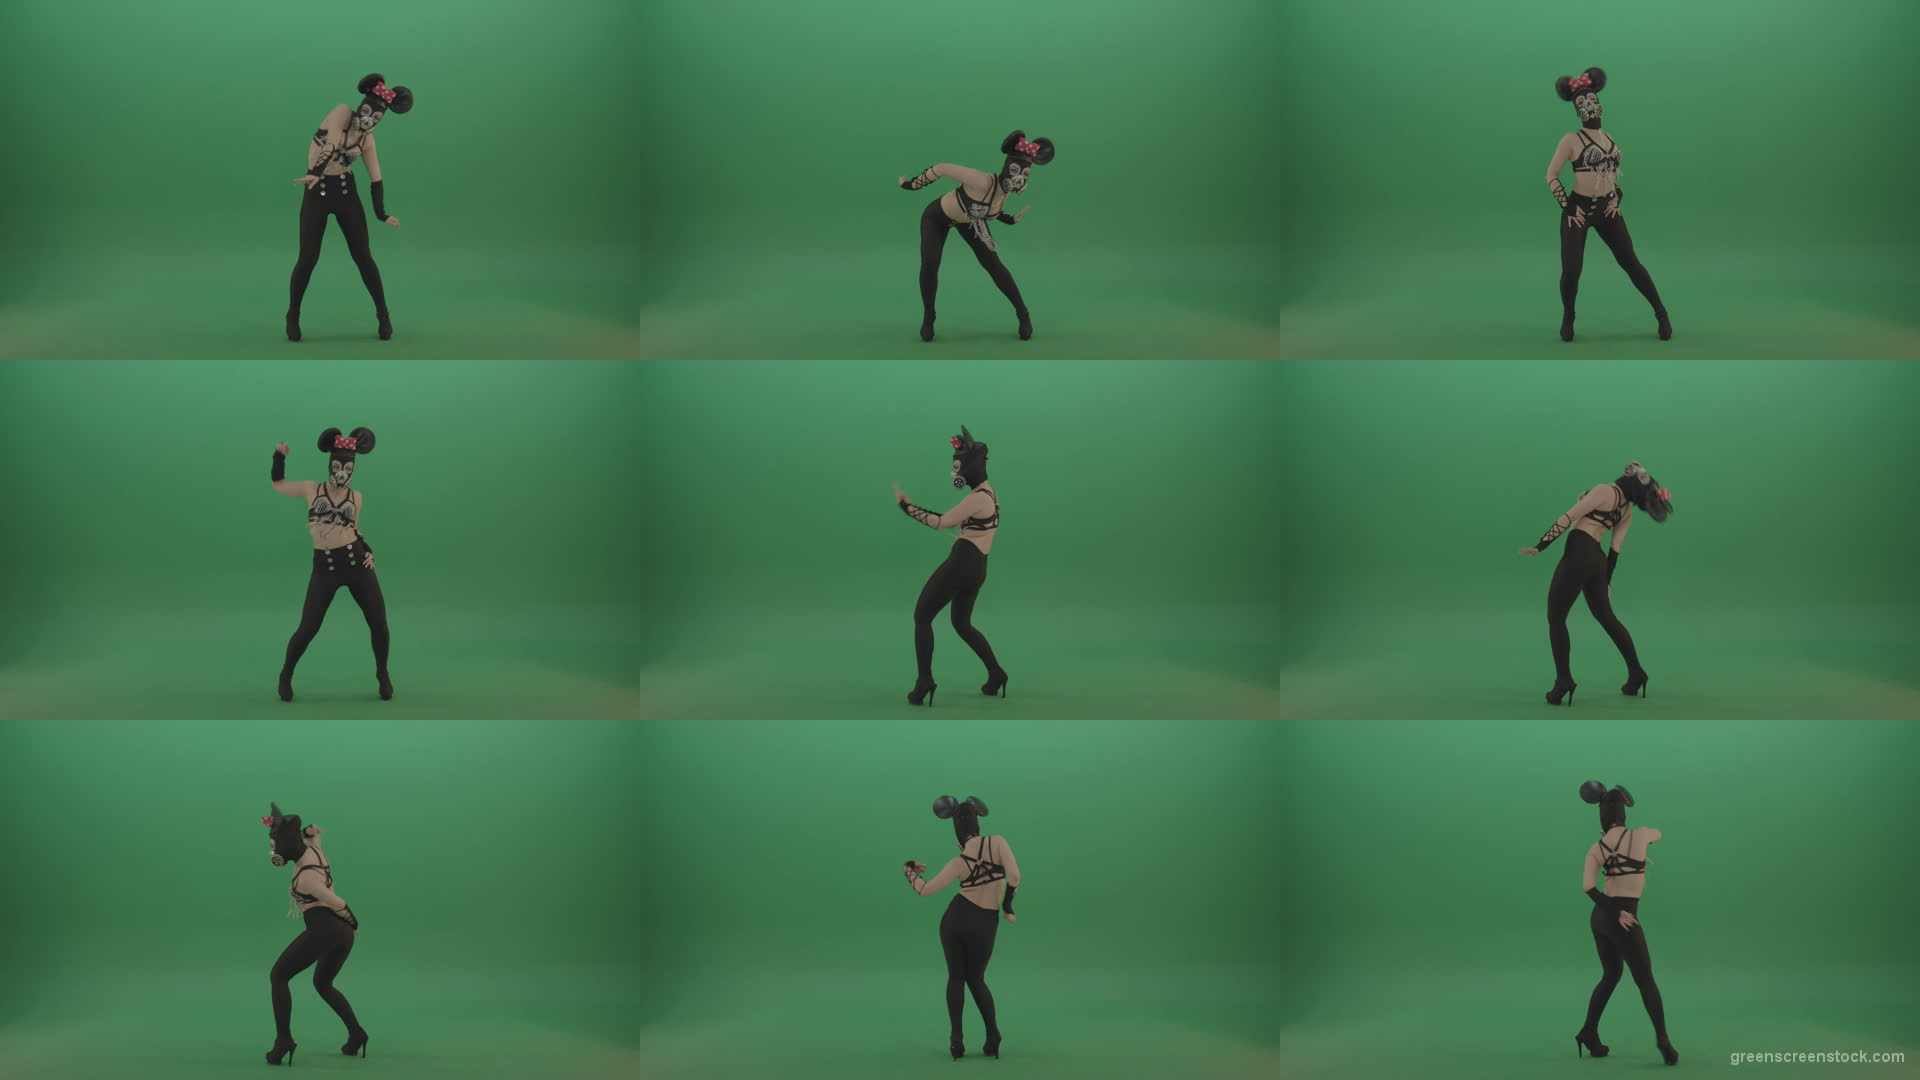 Girl-quickly-dances-in-the-style-of-Mickey-Mouse-on-the-sides-of-a-sexy-costume-on-green-screen-1920 Green Screen Stock